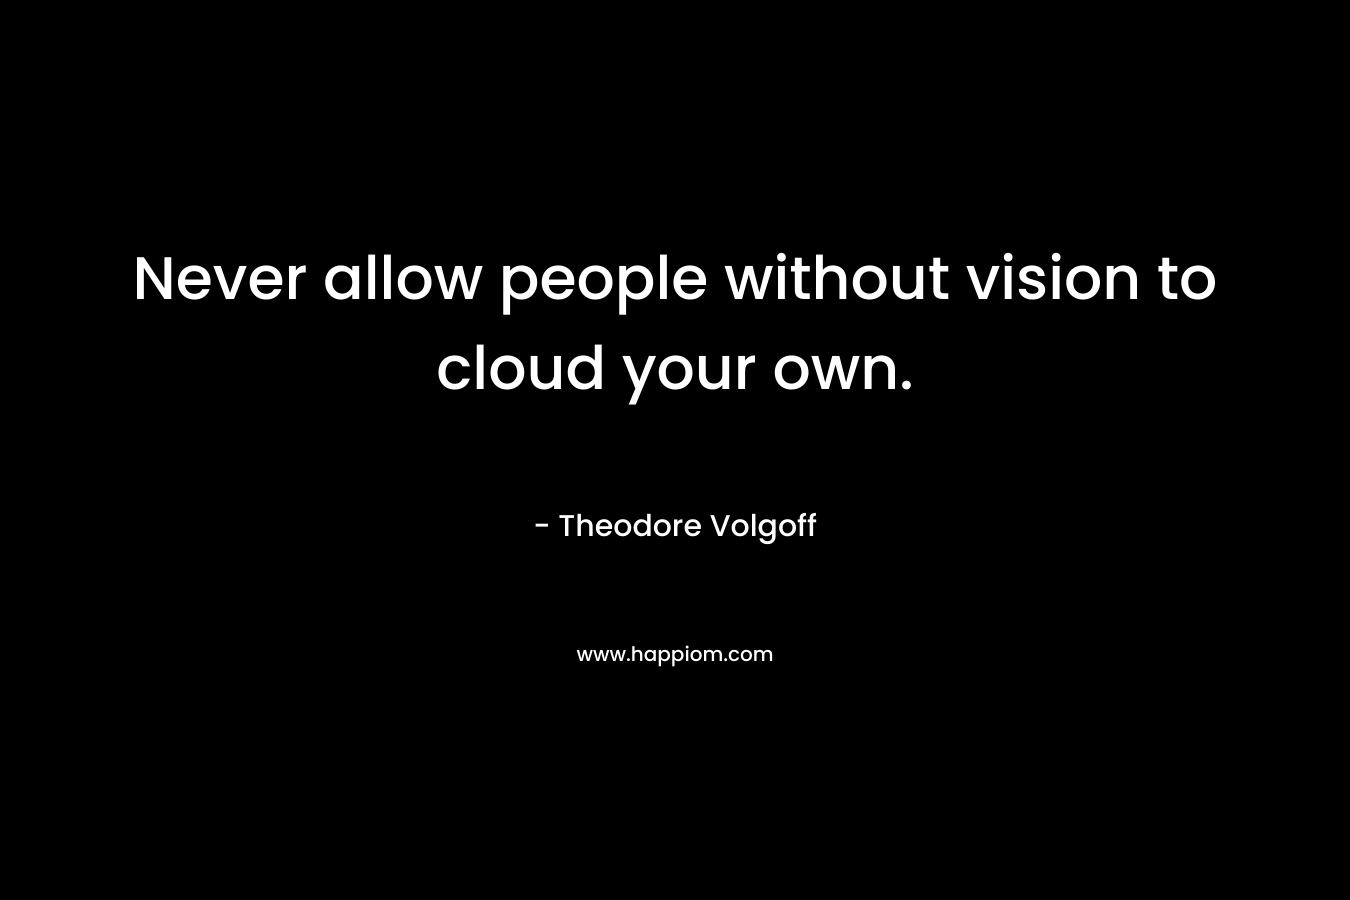 Never allow people without vision to cloud your own.